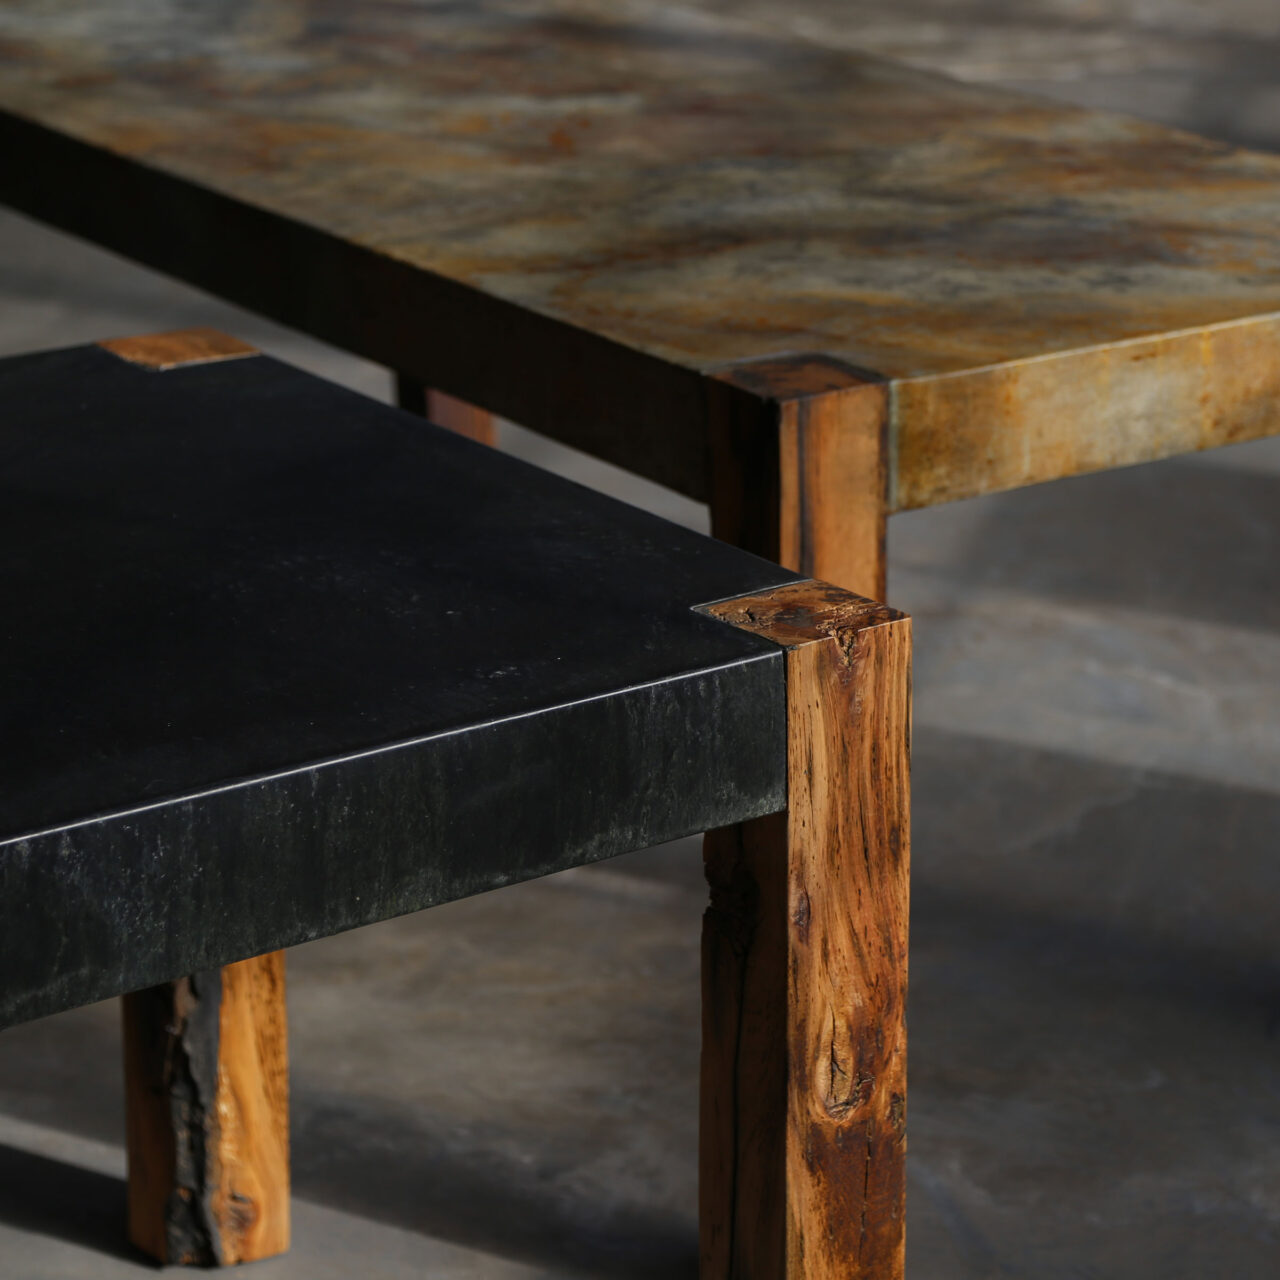 A custom made table by SENTIENT Furniture, blending natural wood with a zinc and concrete finish. The combination of materials provides an earthy, industrial look, perfect for a modern space.